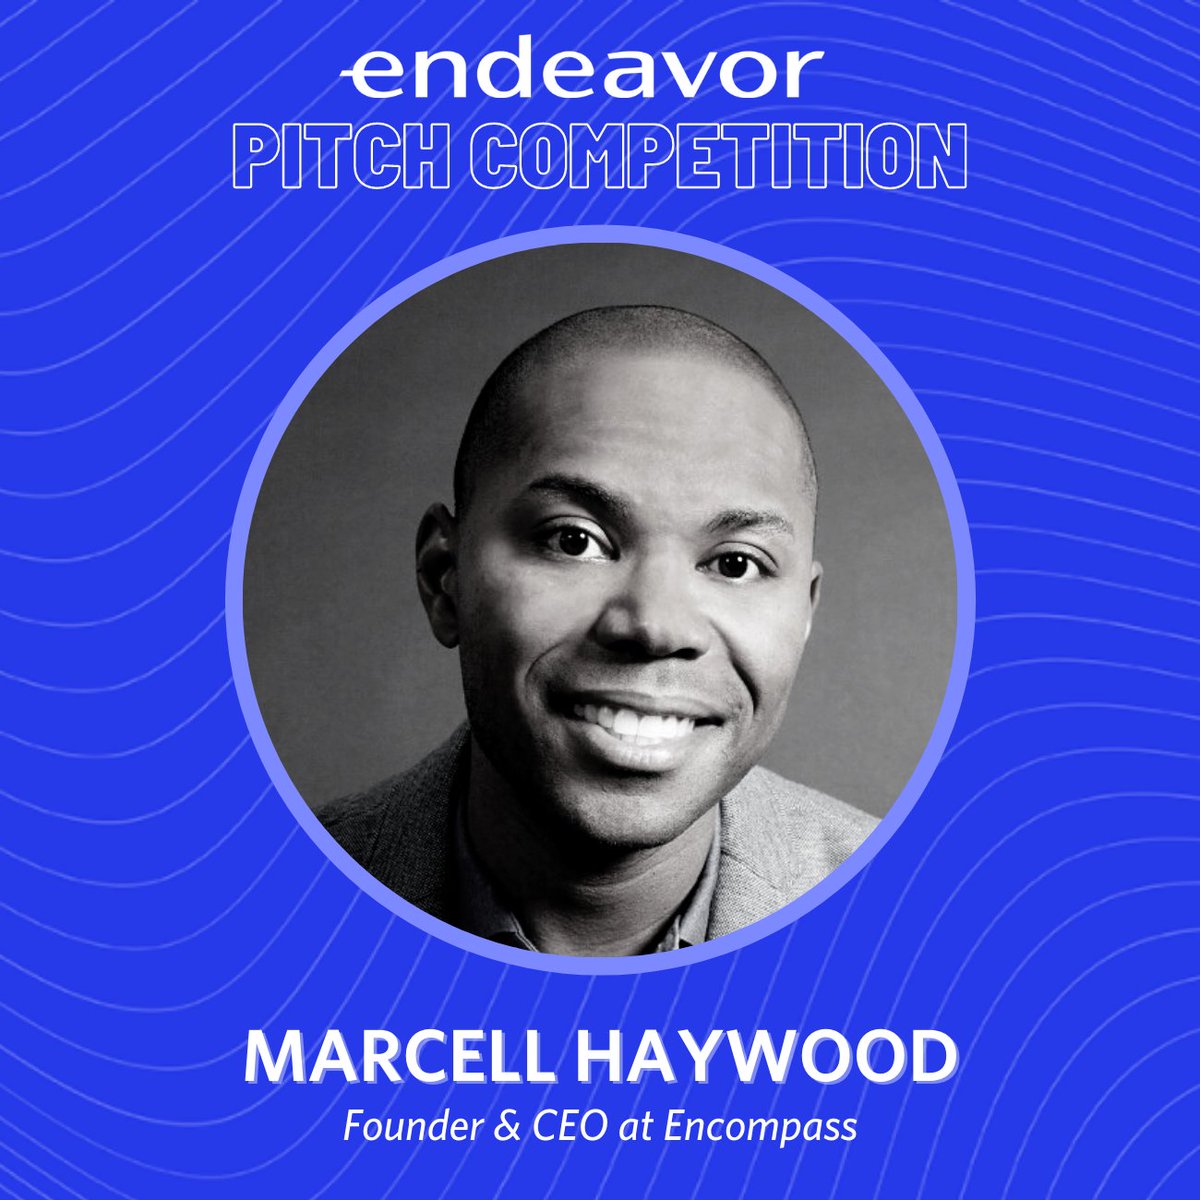 On June 30th, I’ll be a panelist on the first Endeavor Pitch Competition for Black founders. Please join me to watch the 10 selected entrepreneurs showcase their ideas and run to win prizes from Microsoft for Startups and Endeavor Miami. RSVP at hubs.ly/H0RcRqZ0.